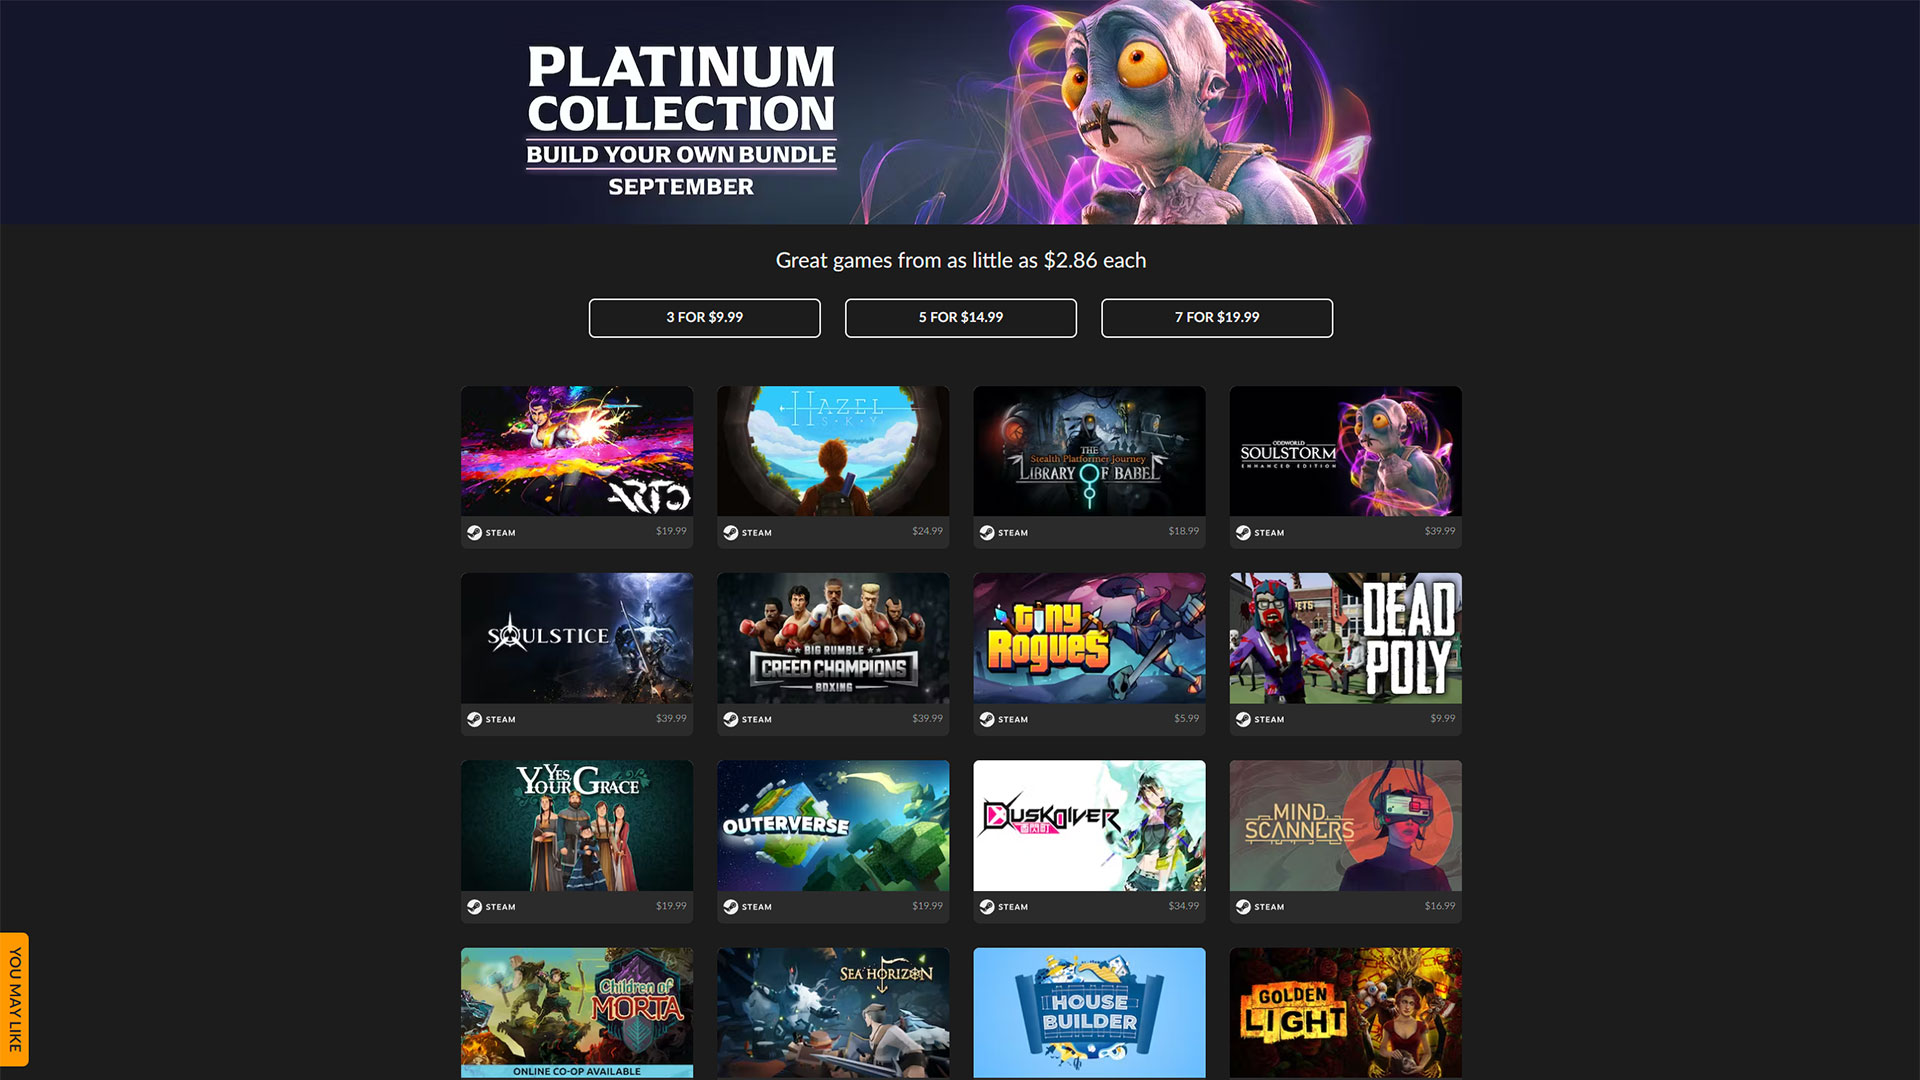 Choose from 16 games in September's Platinum Collection Build Your Own Bundle at Fanatical